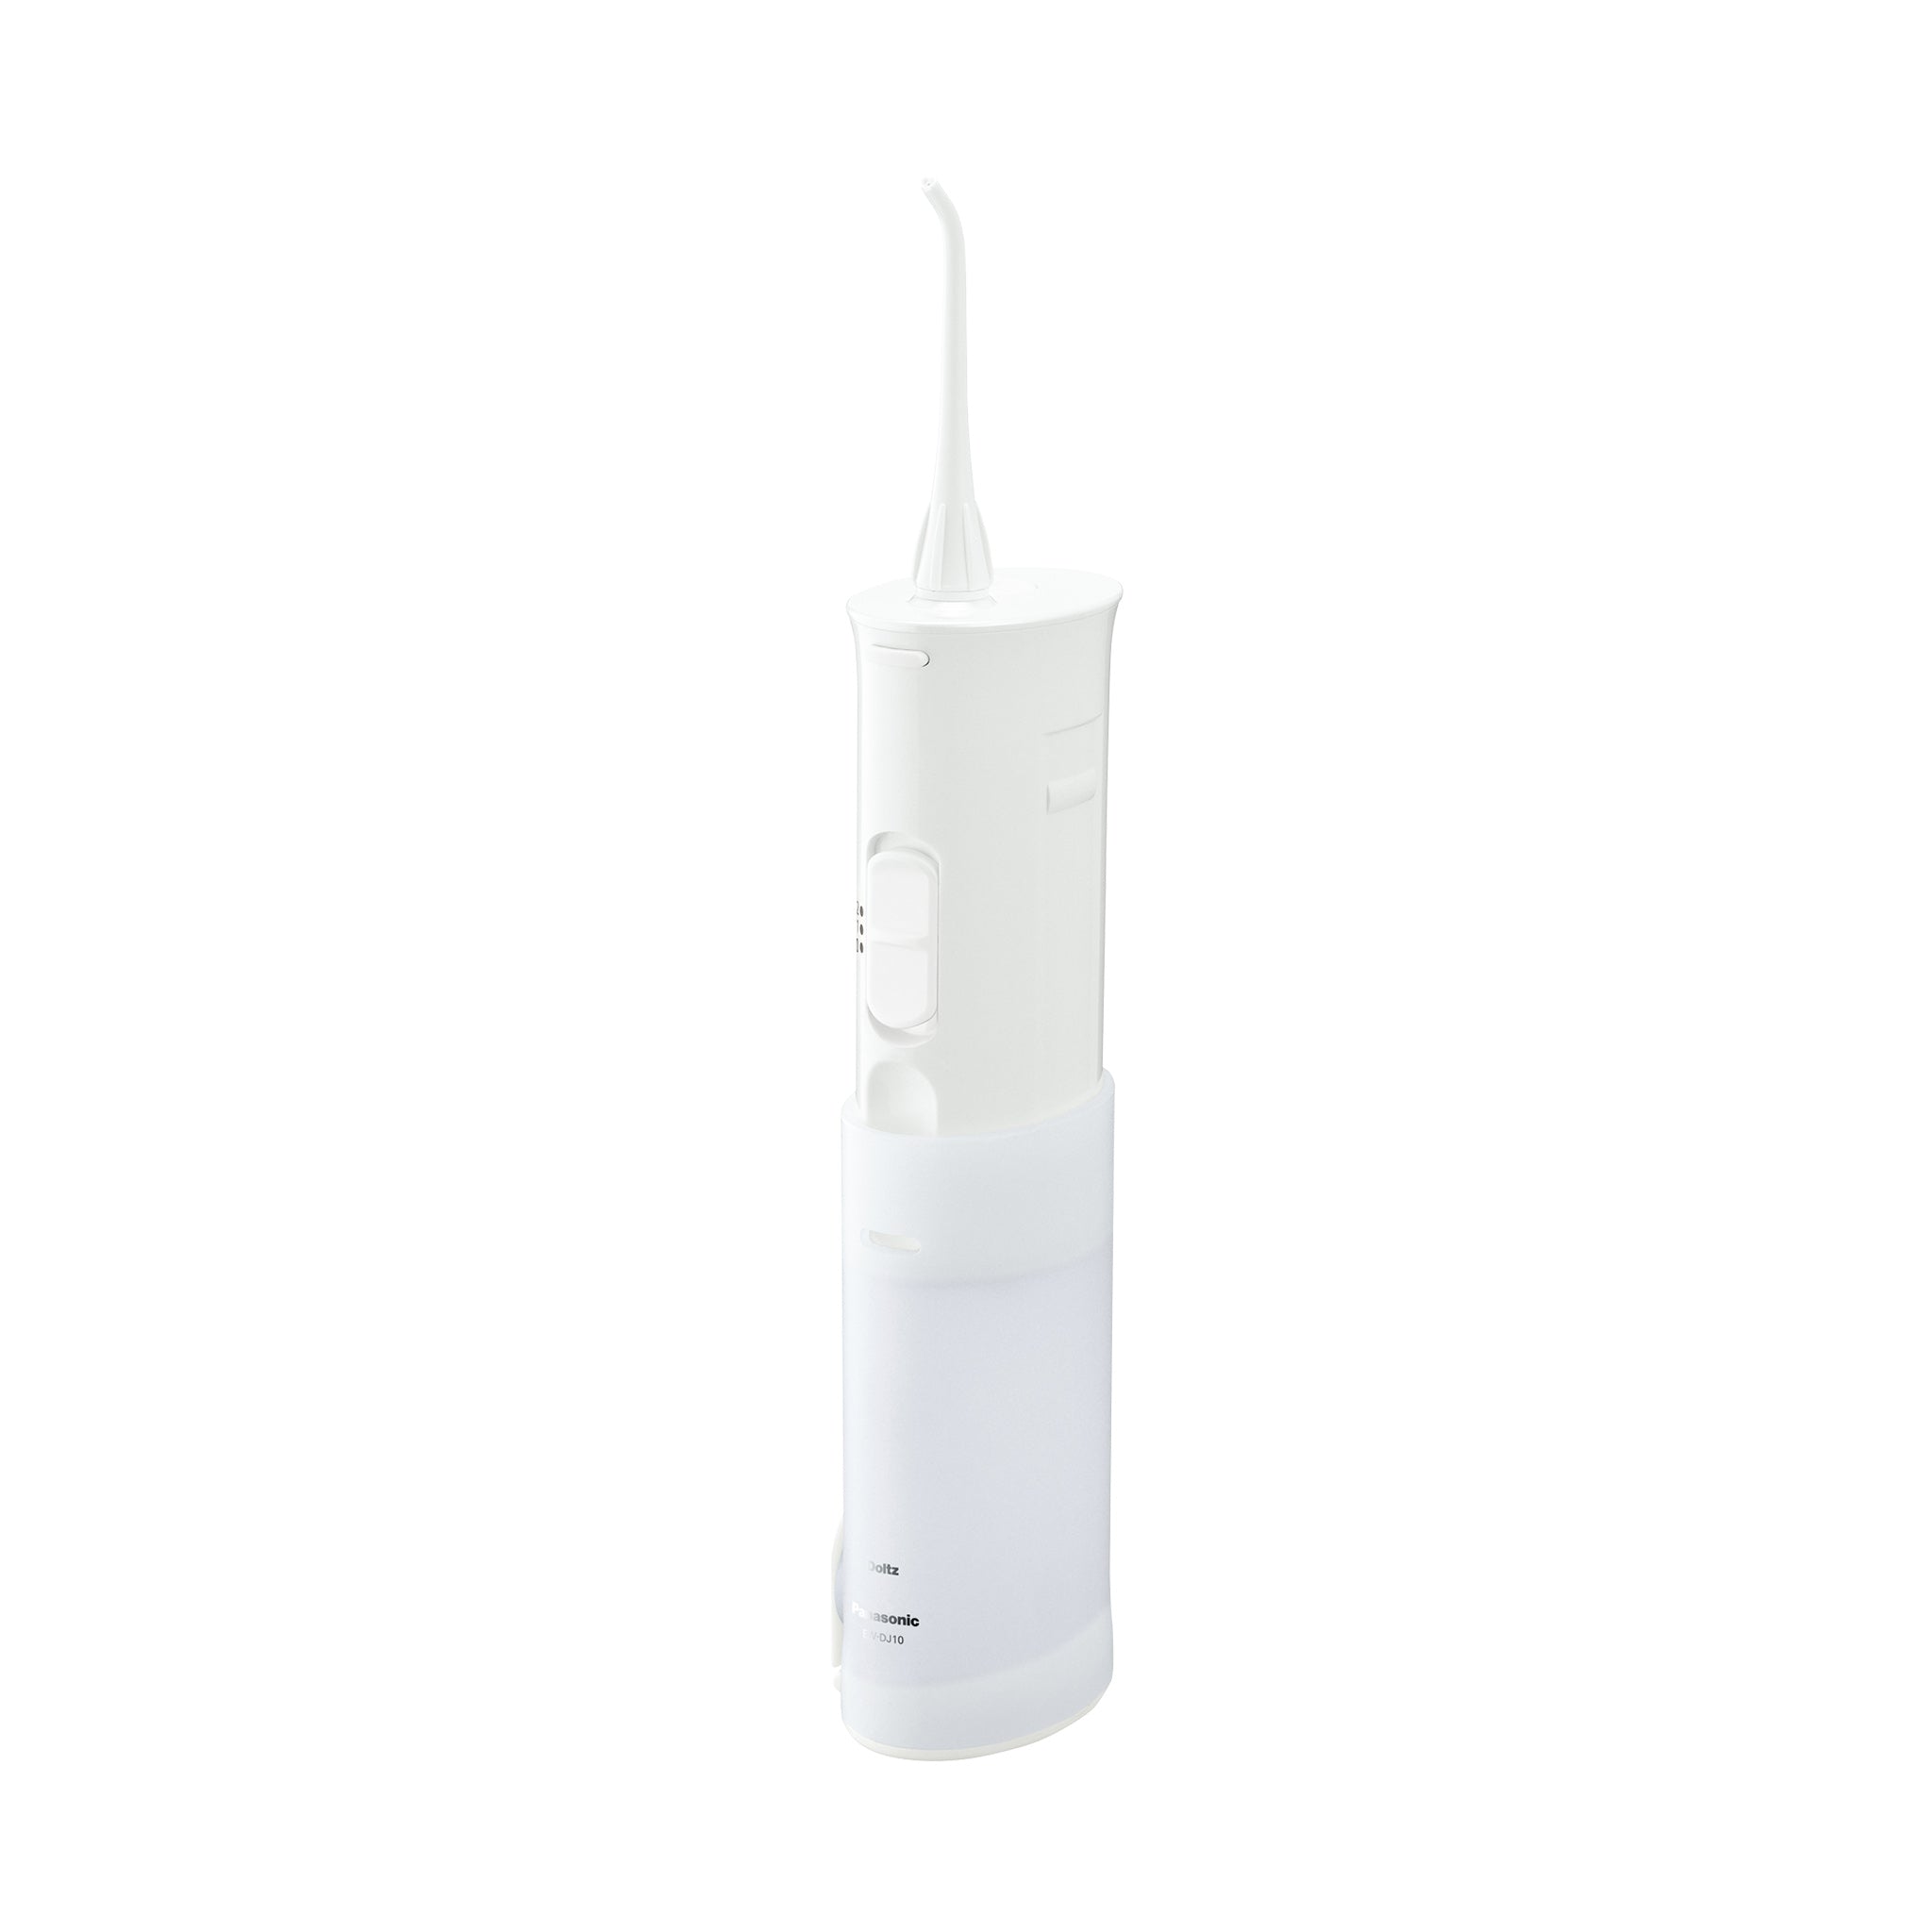 Portable Cordless Water Flosser